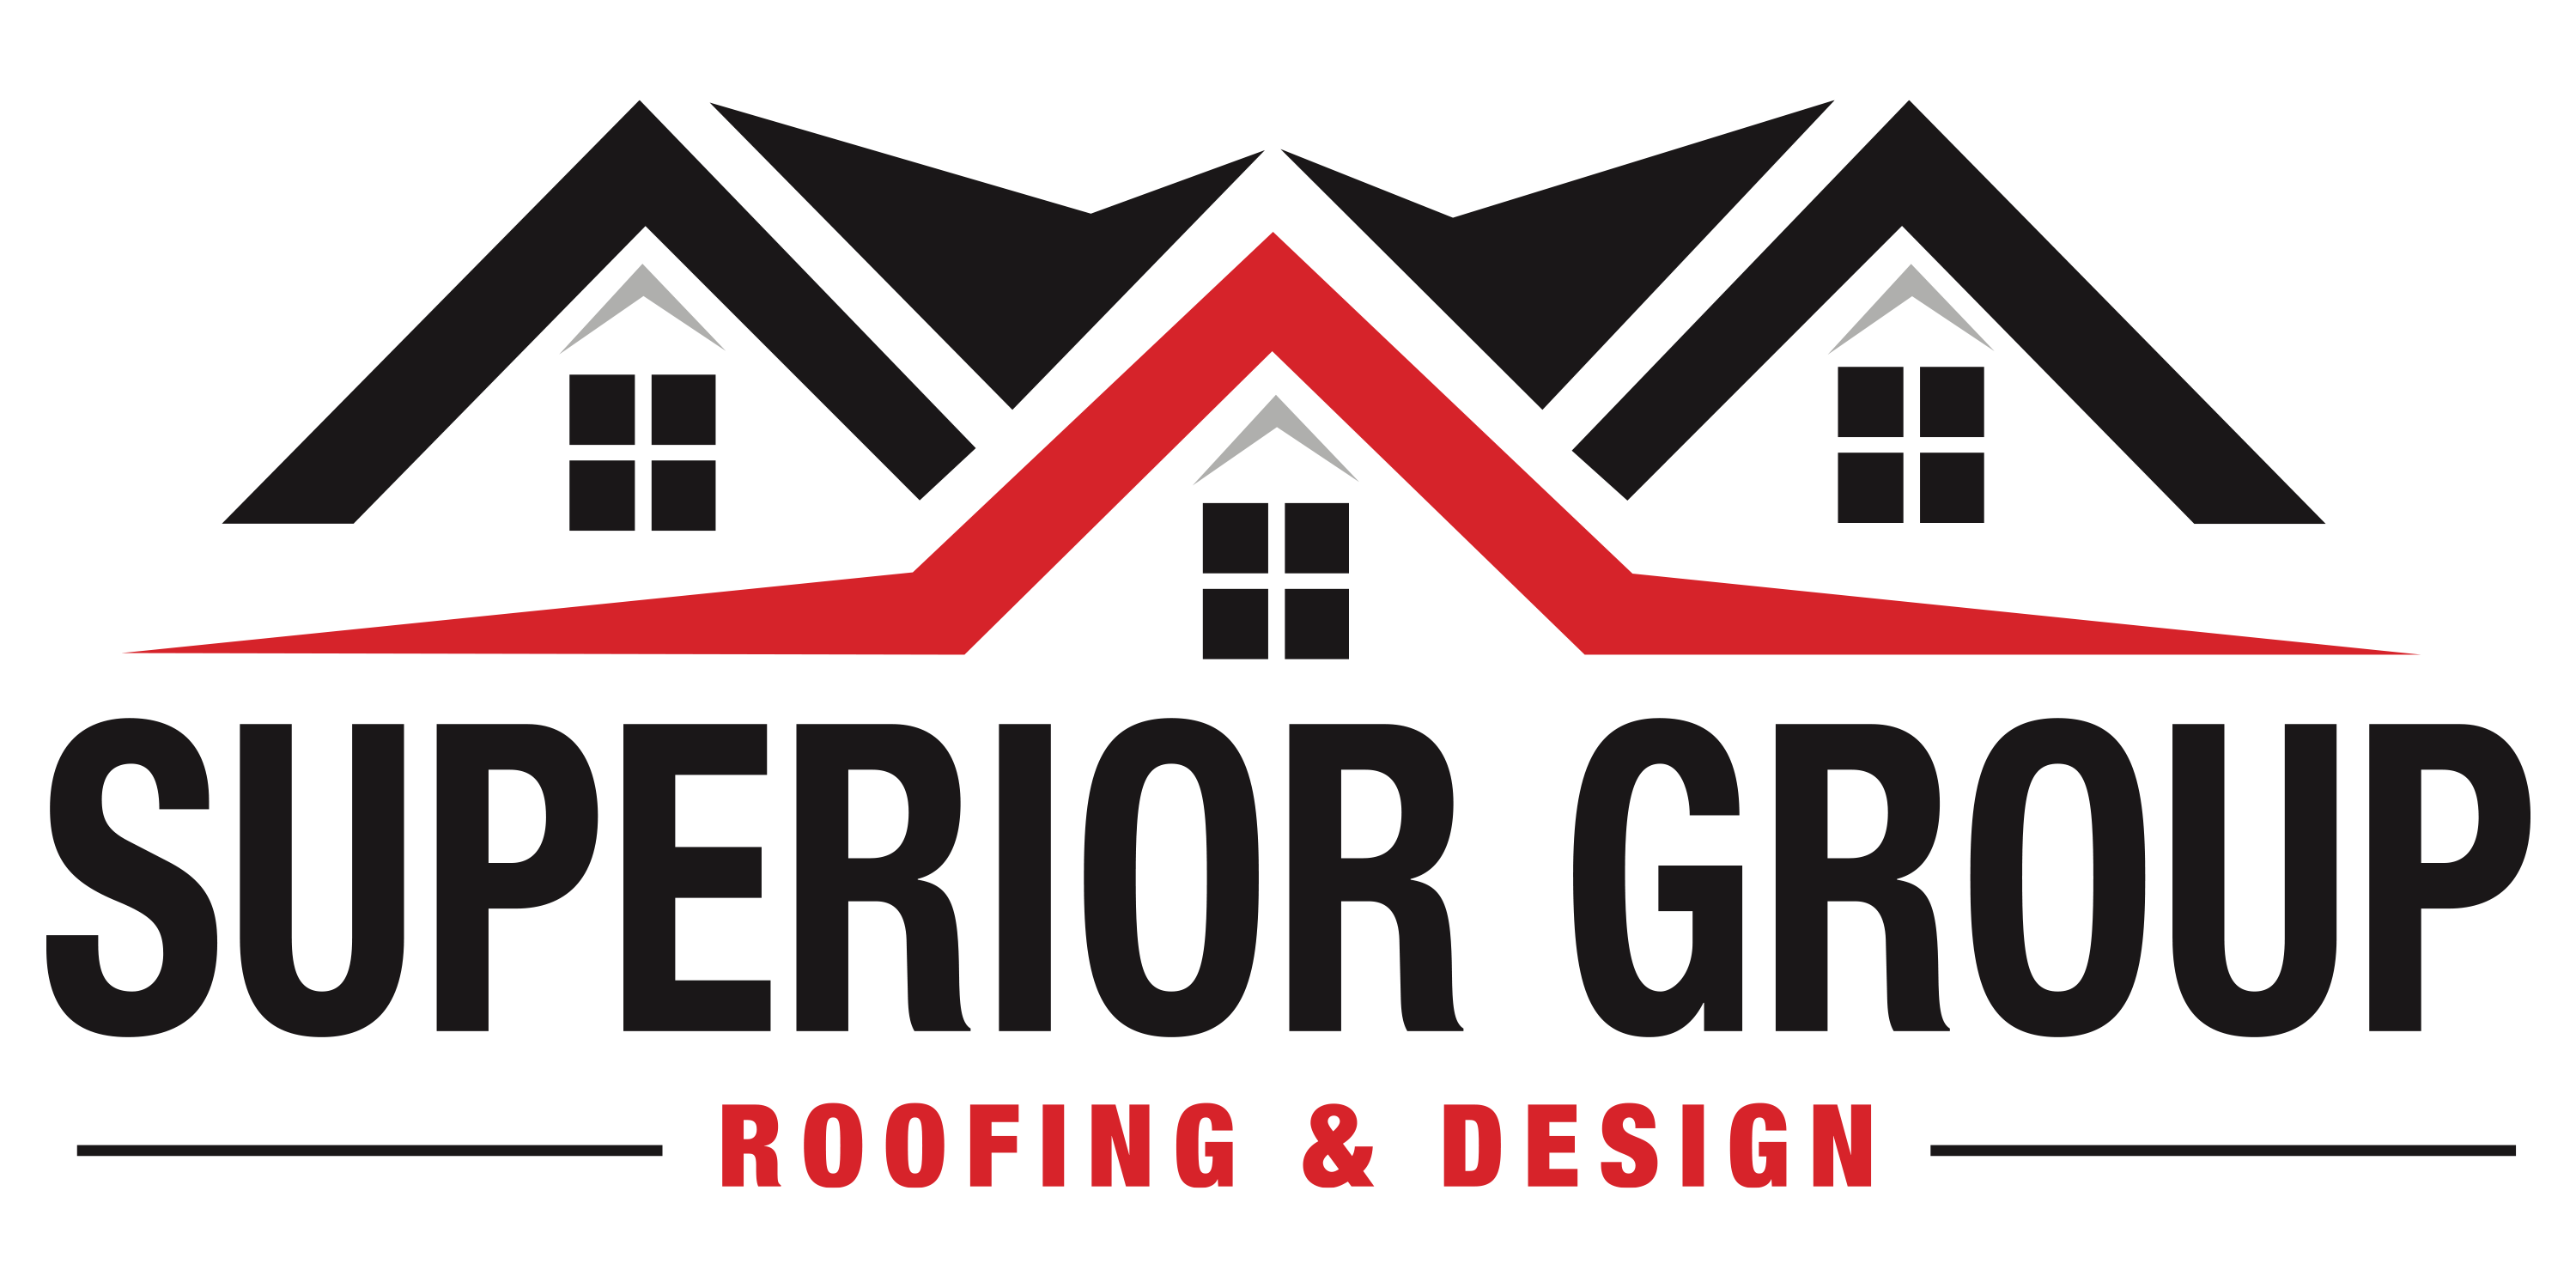 Superior Group Roofing & Design - Louisiana Local Roofers